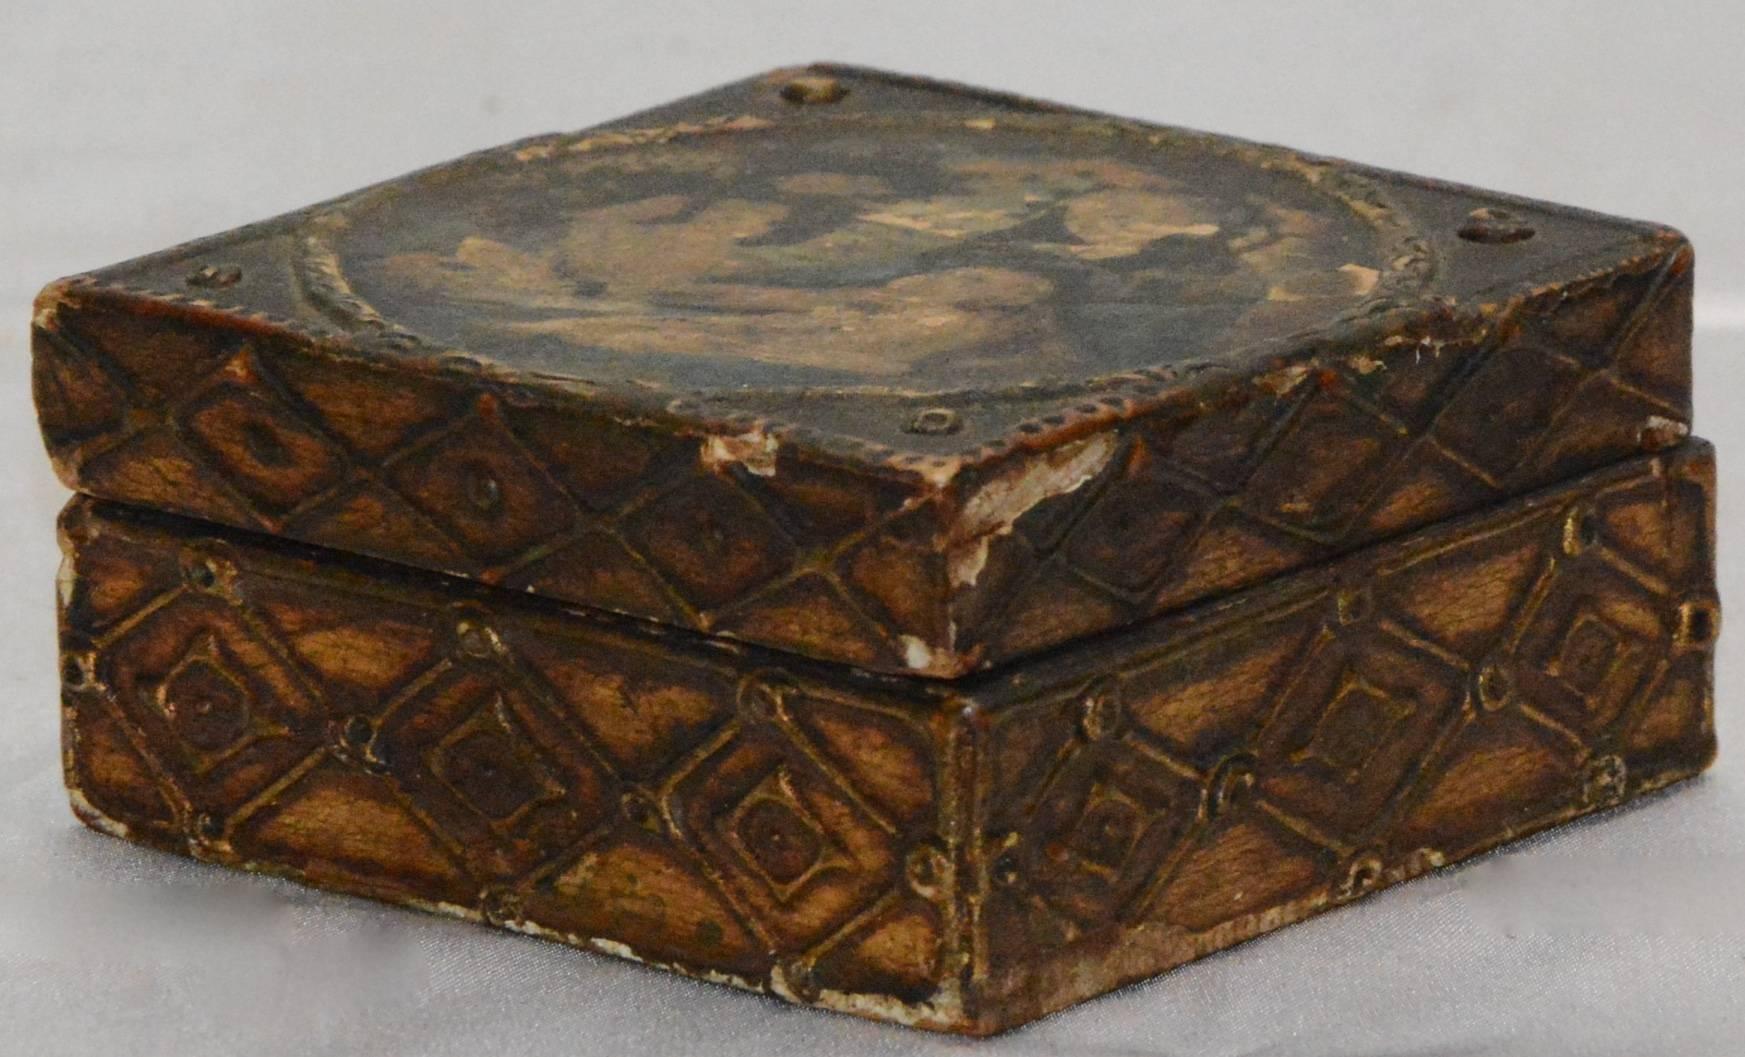 This is a fabulous wooden box is decorated with Madonna and child on the top. Adding to the elegance is the gilt finish on the sides featuring a diamond pattern.
The top opens up to unfinished wood.